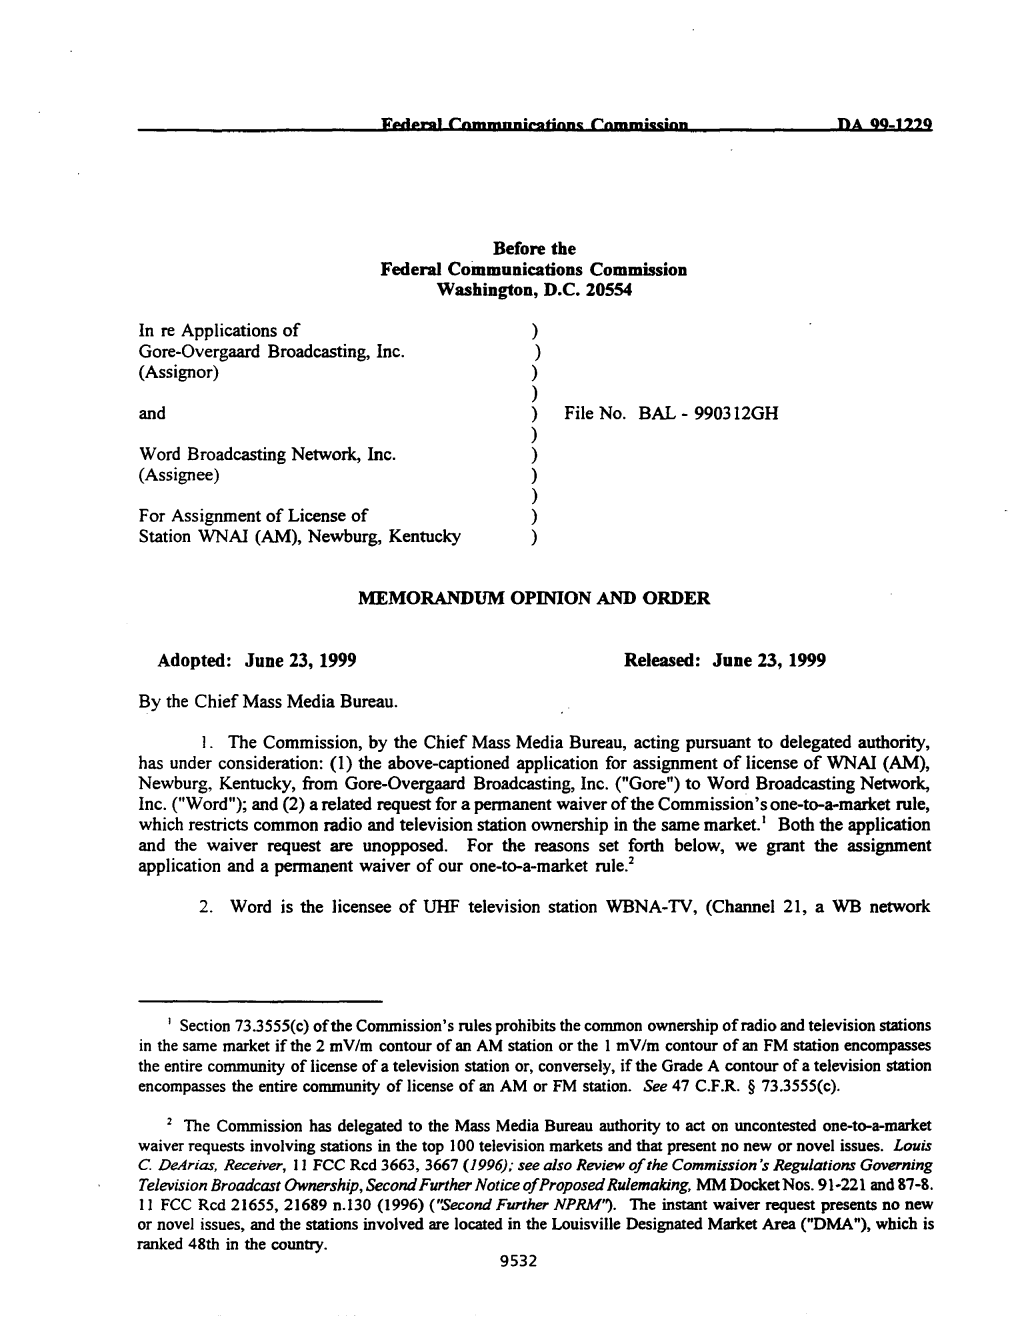 In Re Applications of Gore-Overgaard Broadcasting, Inc. (Assignor) and ) File No